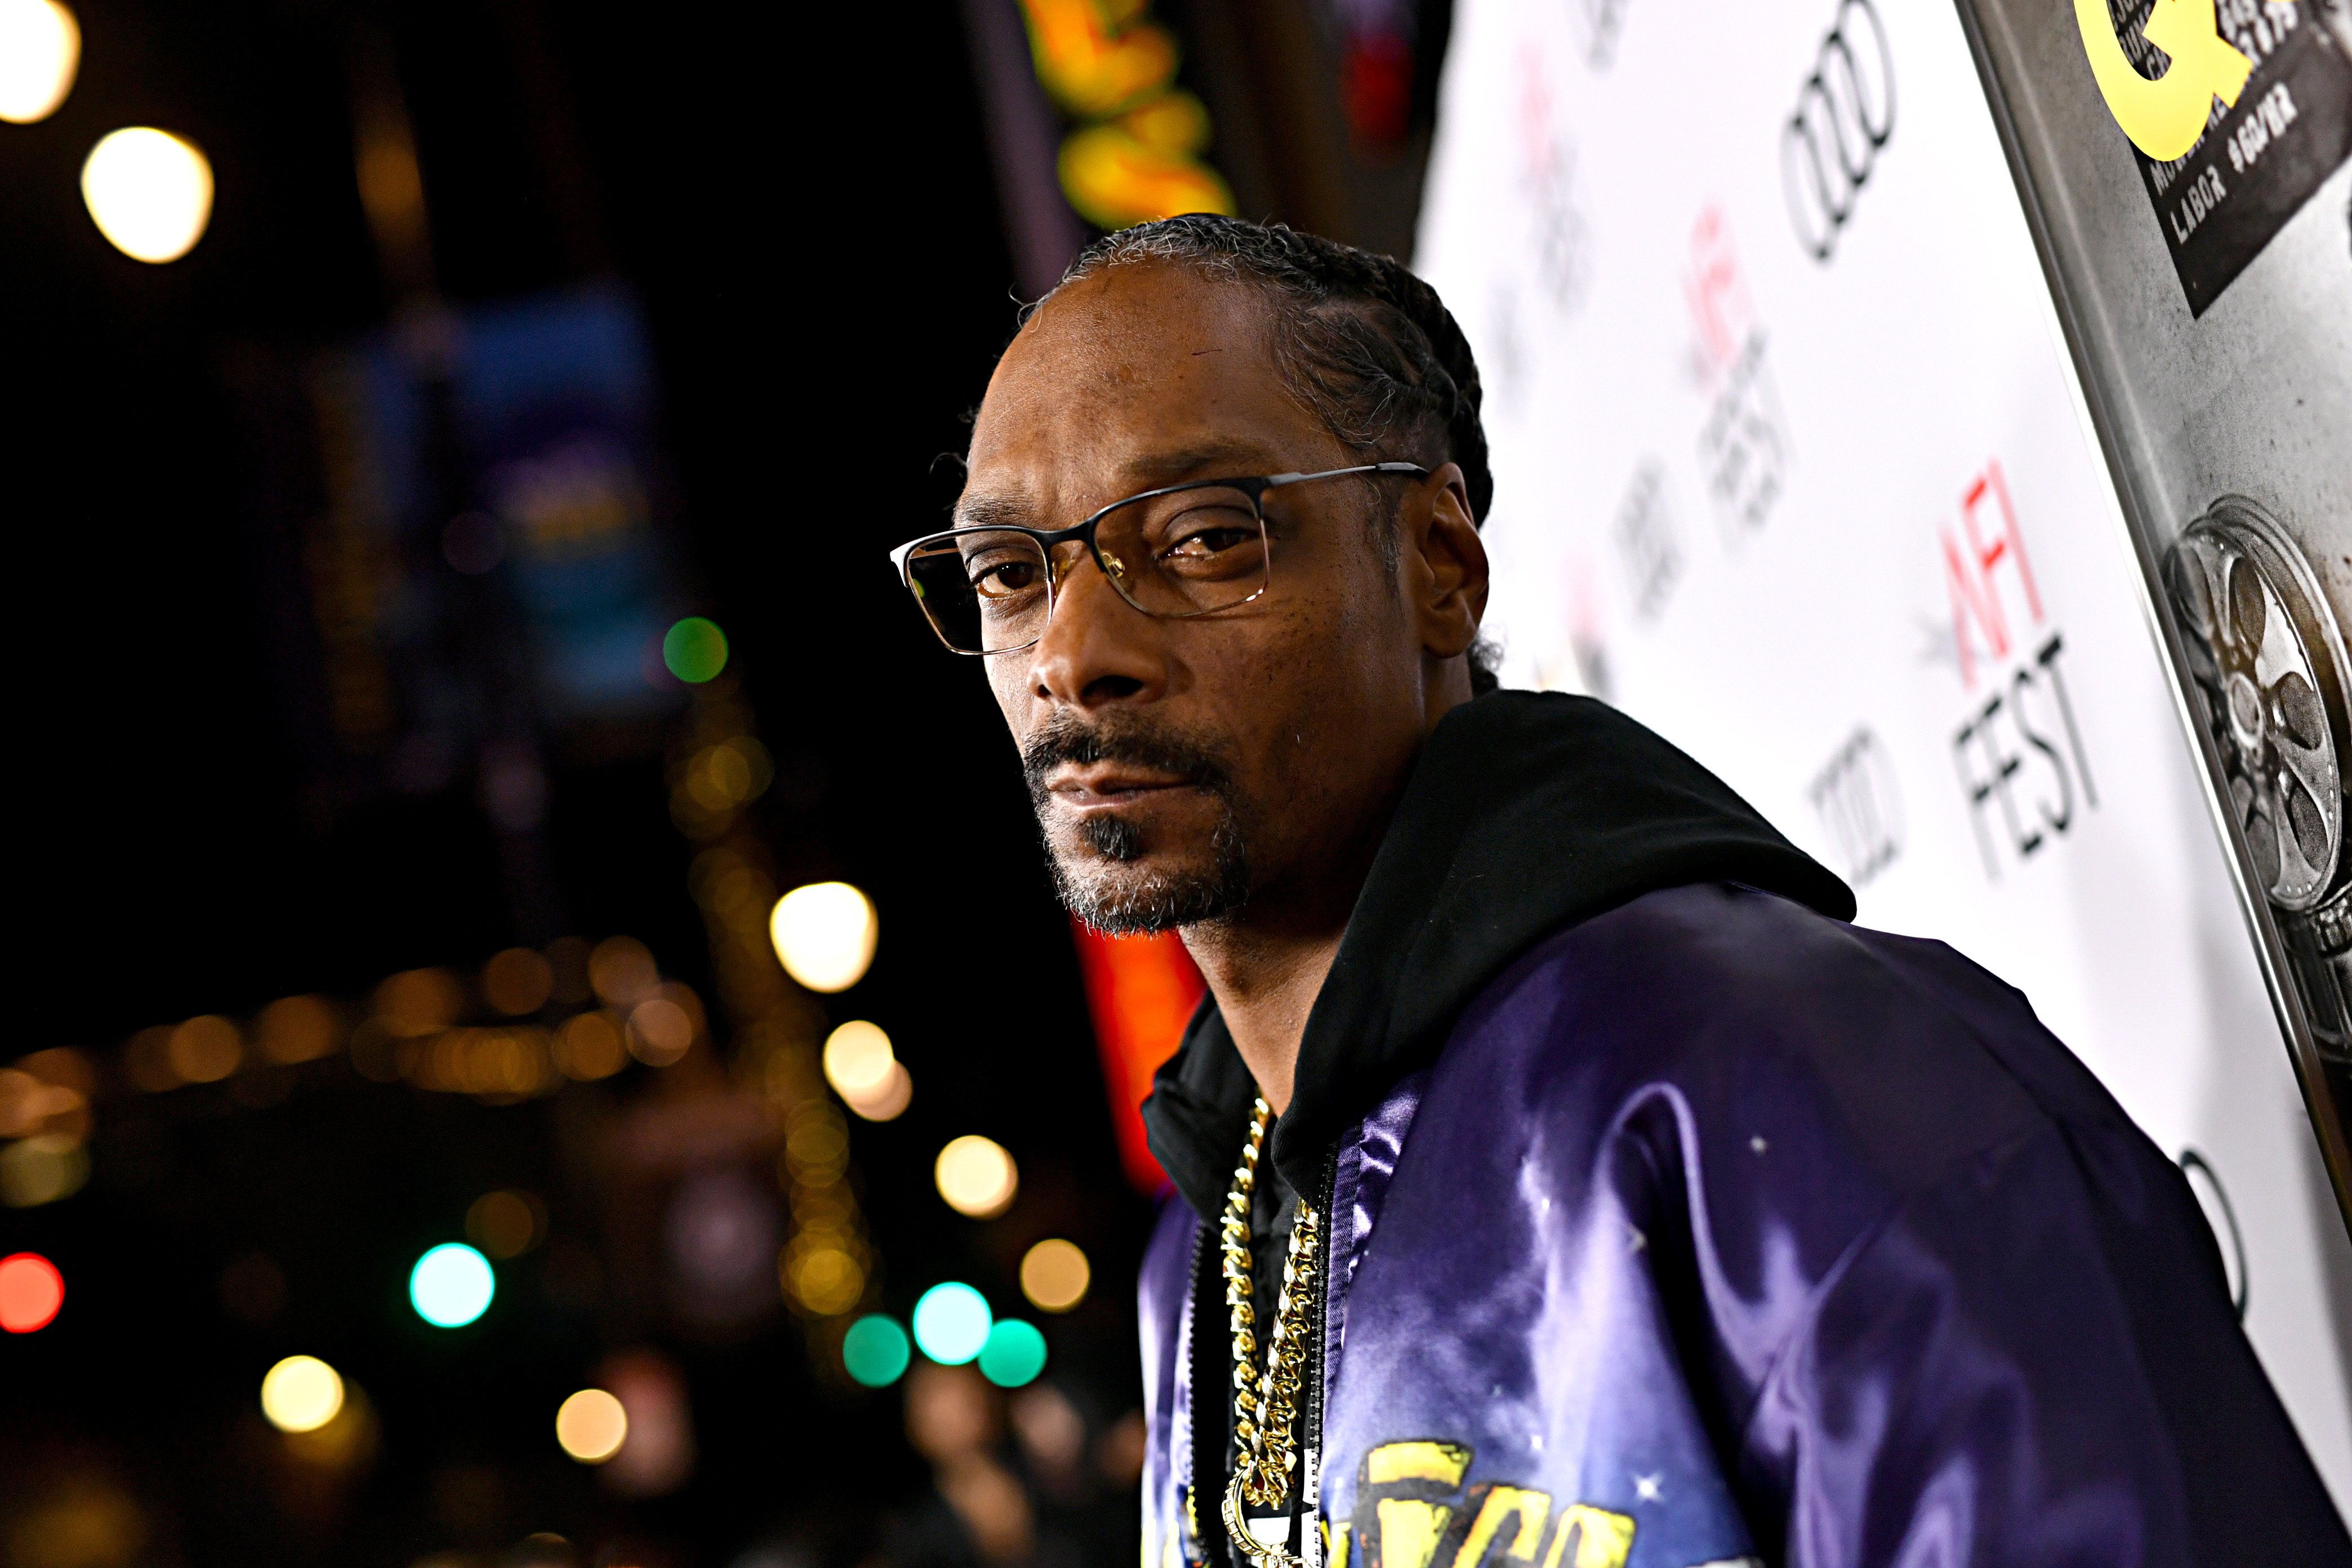 Snoop Dogg attends the "Queen & Slim" Premiere at AFI FEST 2019 on November 14, 2019 in Hollywood, California | Photo: GettyImages